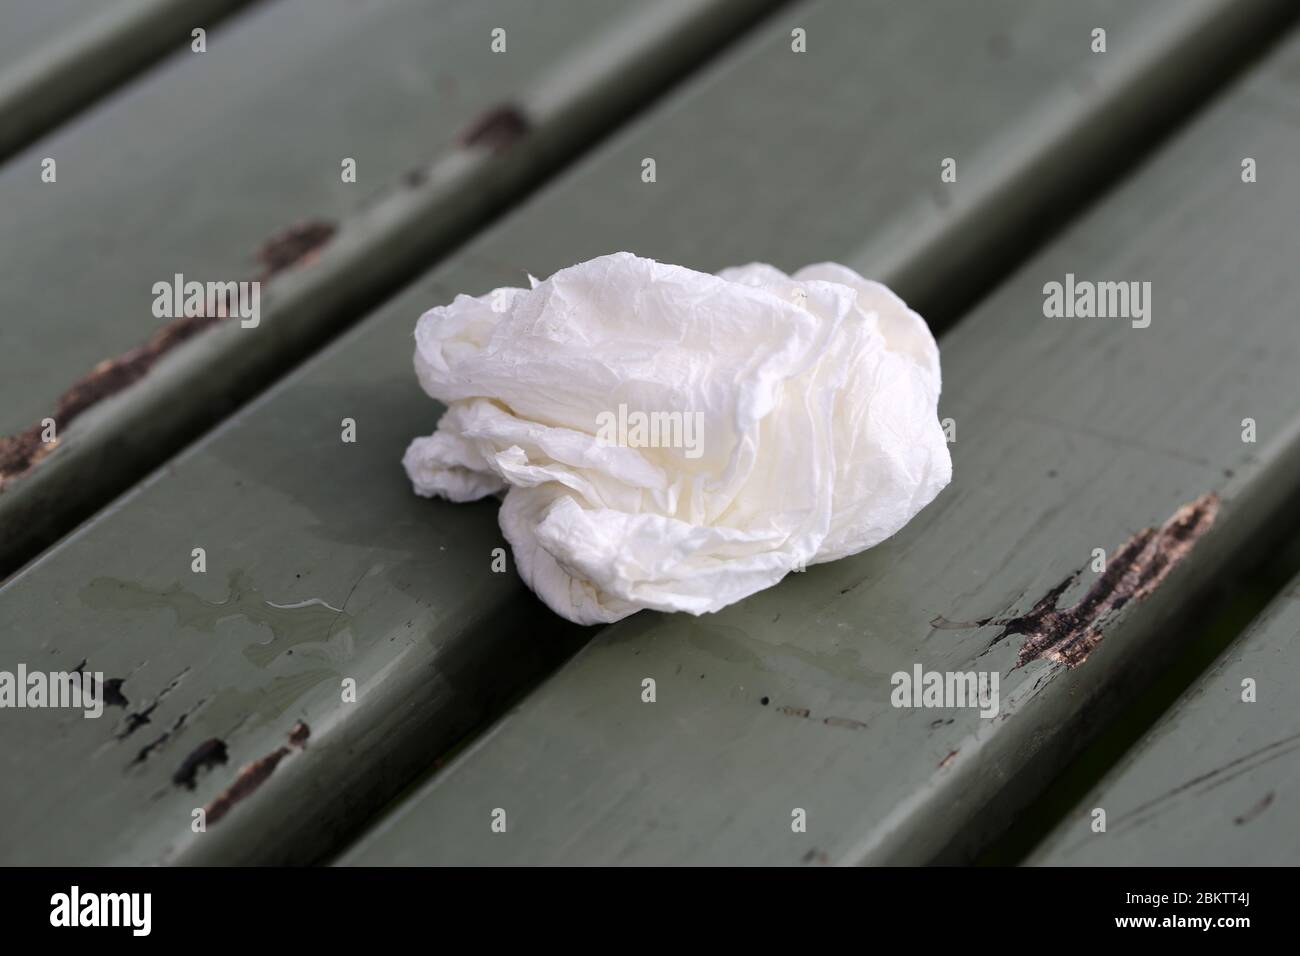 Zurich Etc High Resolution Stock Photography and Images - Alamy